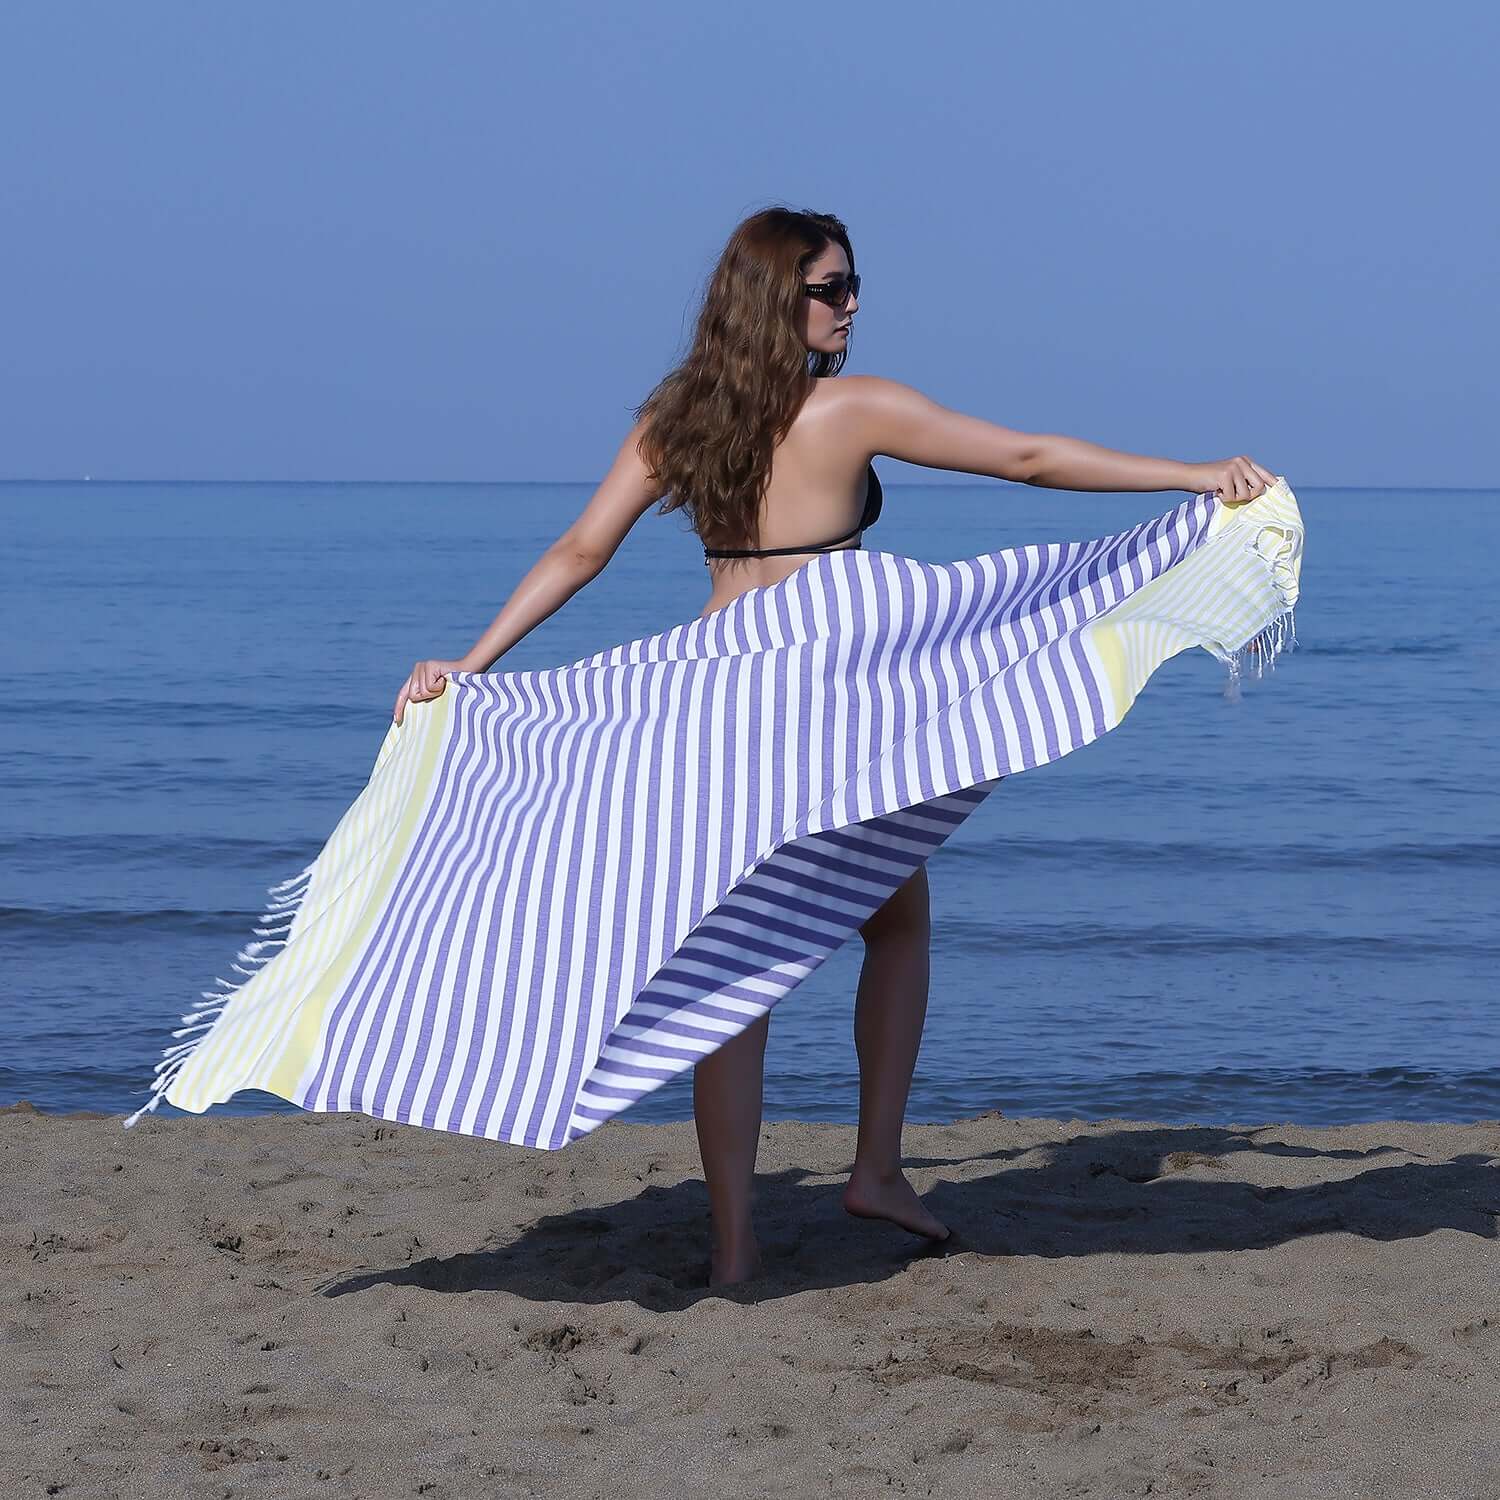 Woman at the beach showcasing a Loom Legacy purple and yellow striped beach towel with tassels, with the sea in the background.